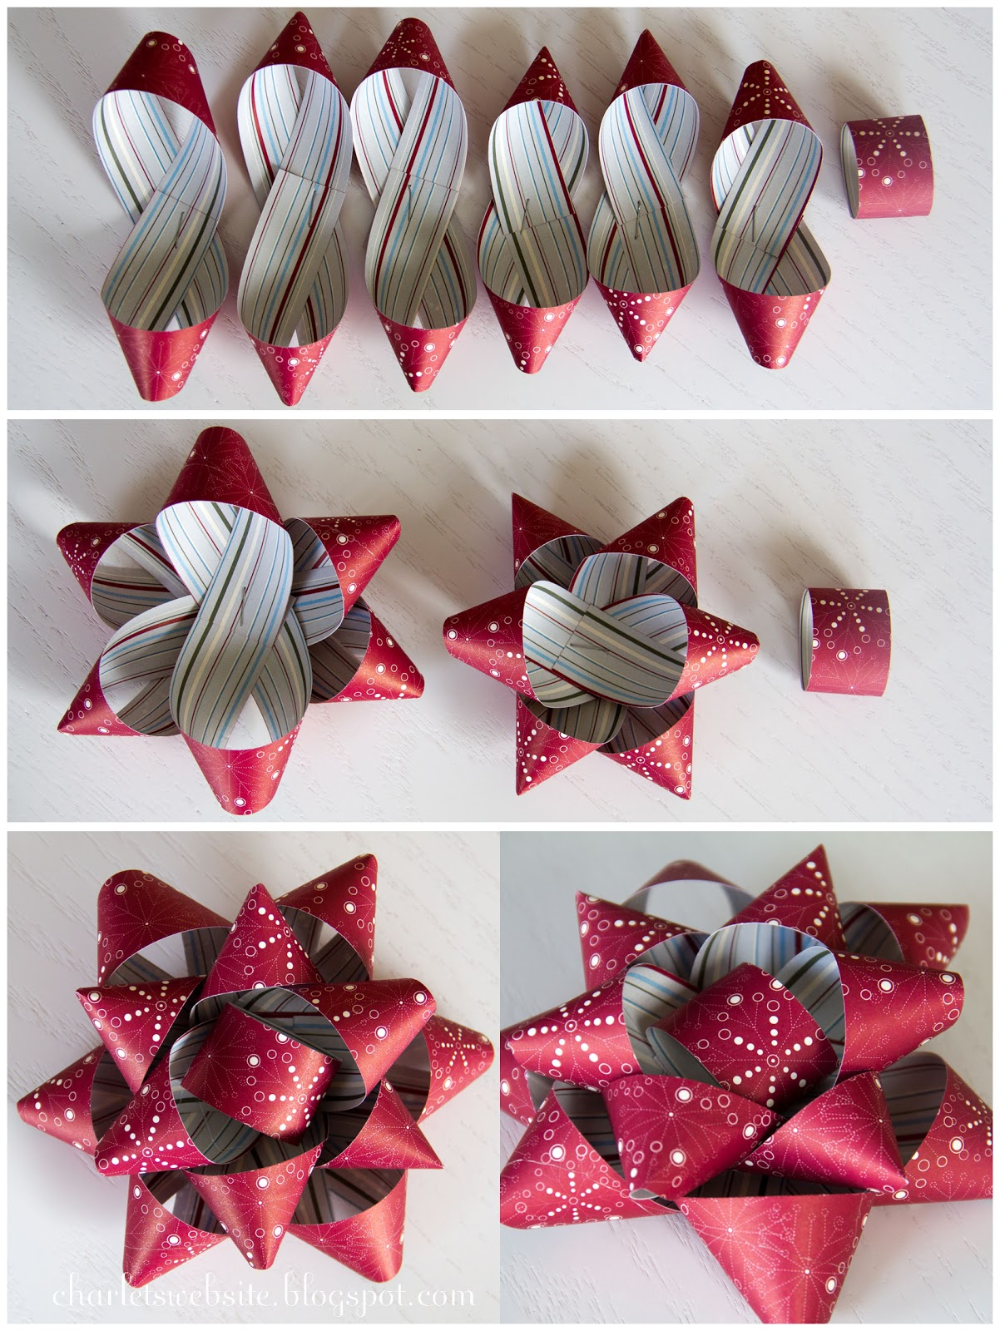 7 DIY Bows to Make with Leftover Wrapping Paper - Twelve Days of Christmas - 7 DIY Bows to Make with Leftover Wrapping Paper - Twelve Days of Christmas -   19 diy Gifts paper ideas